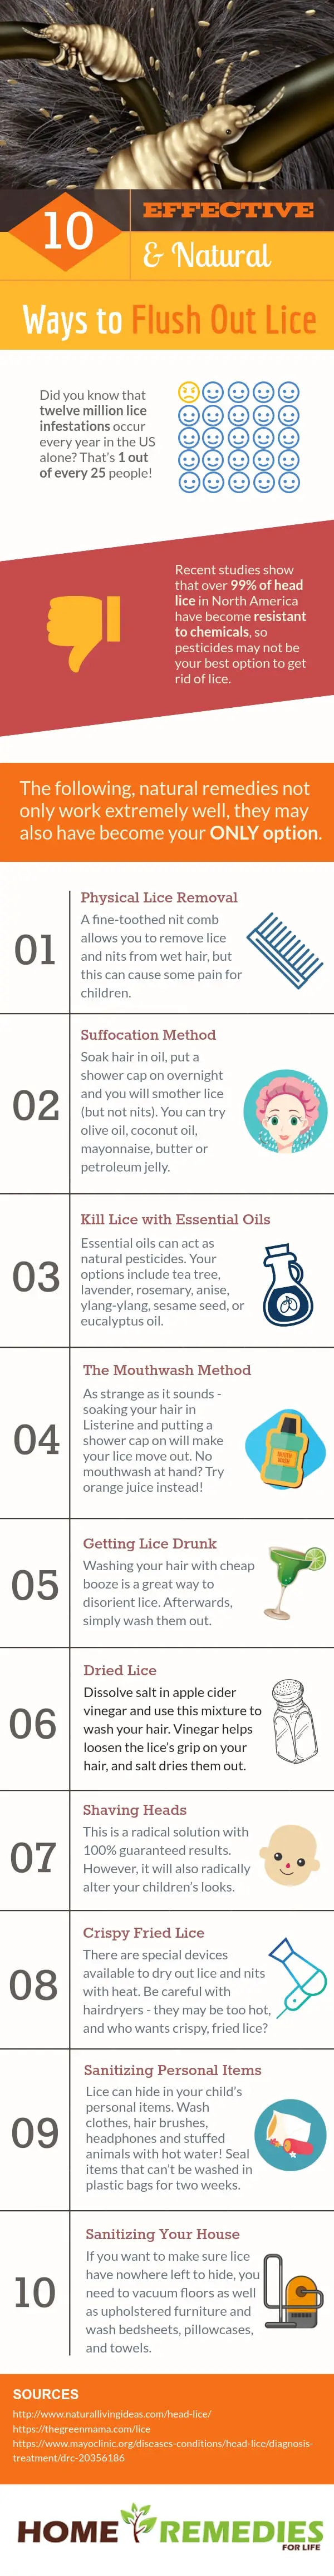 10 Effective and Natural Ways to Flush Out Lice